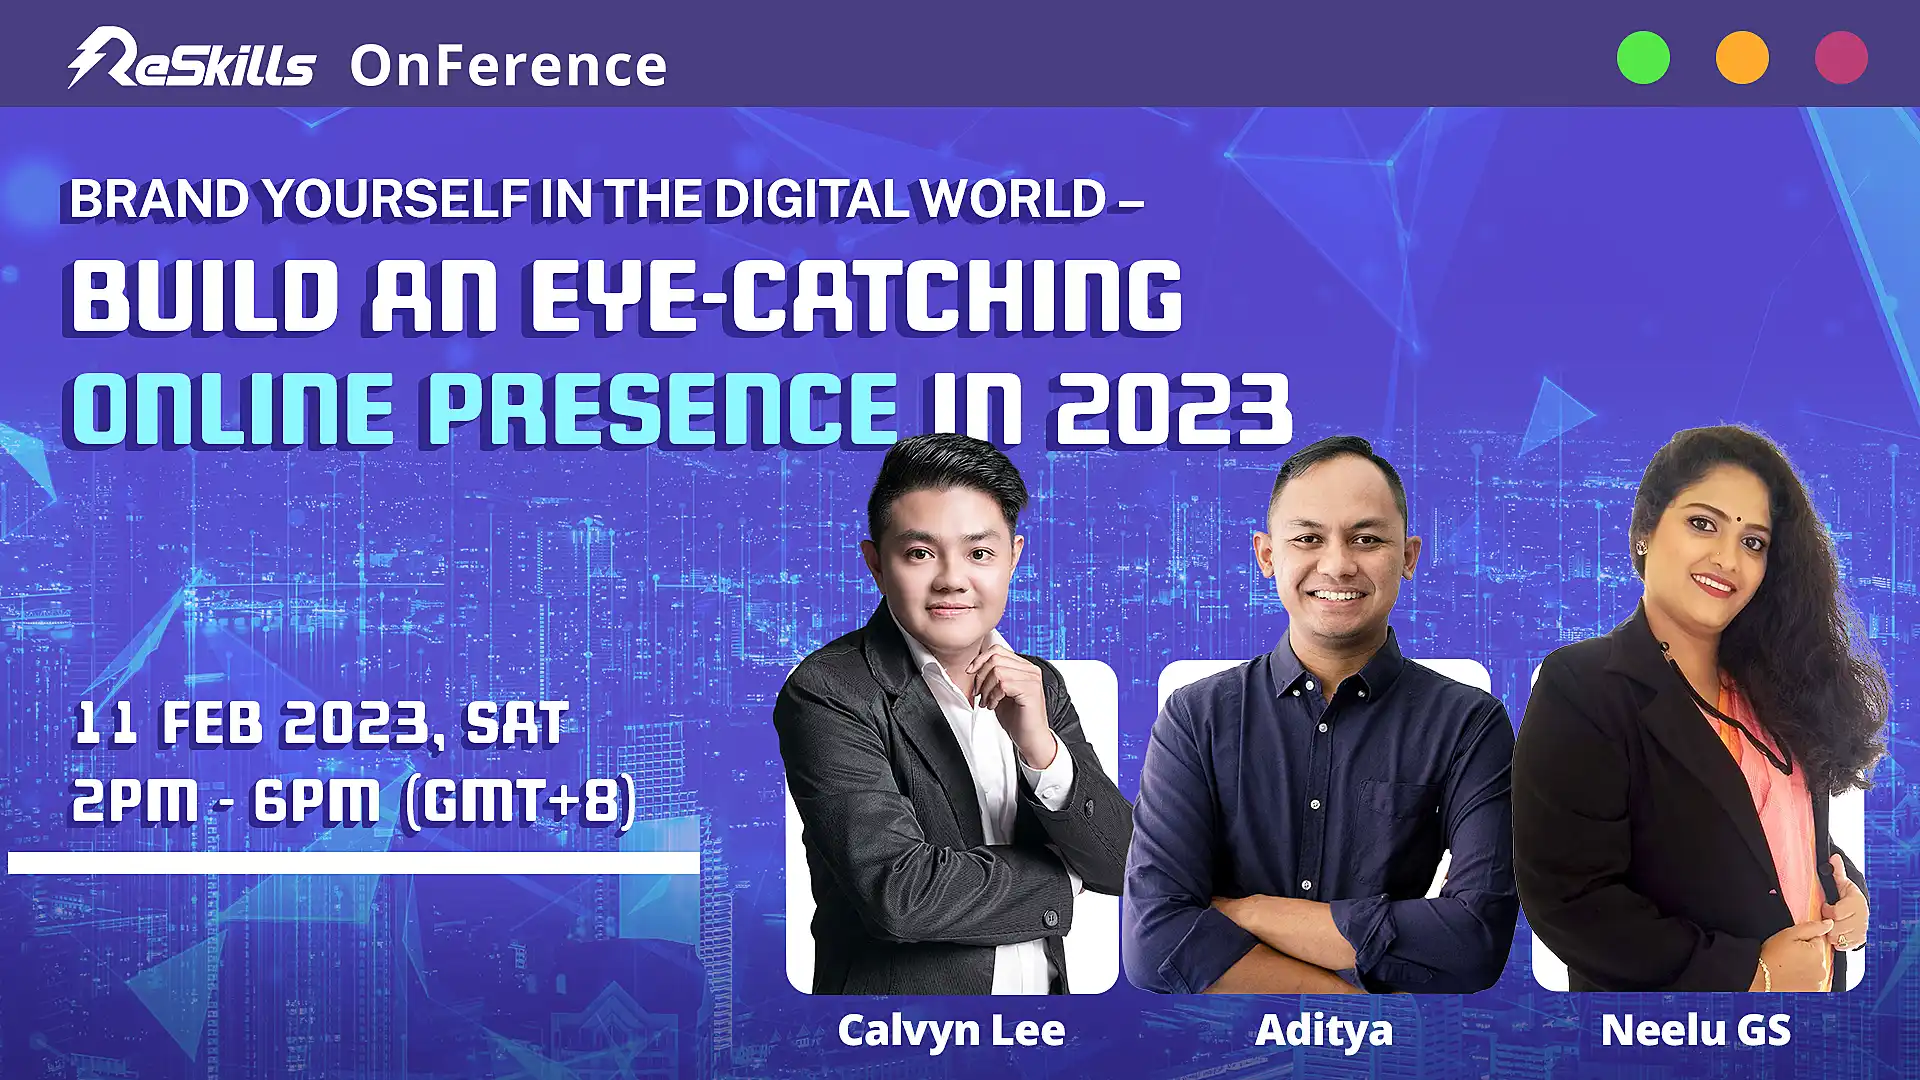 Brand Yourself in the Digital World (Build an Eye-Catching Online Presence in 2023) - ReSkills